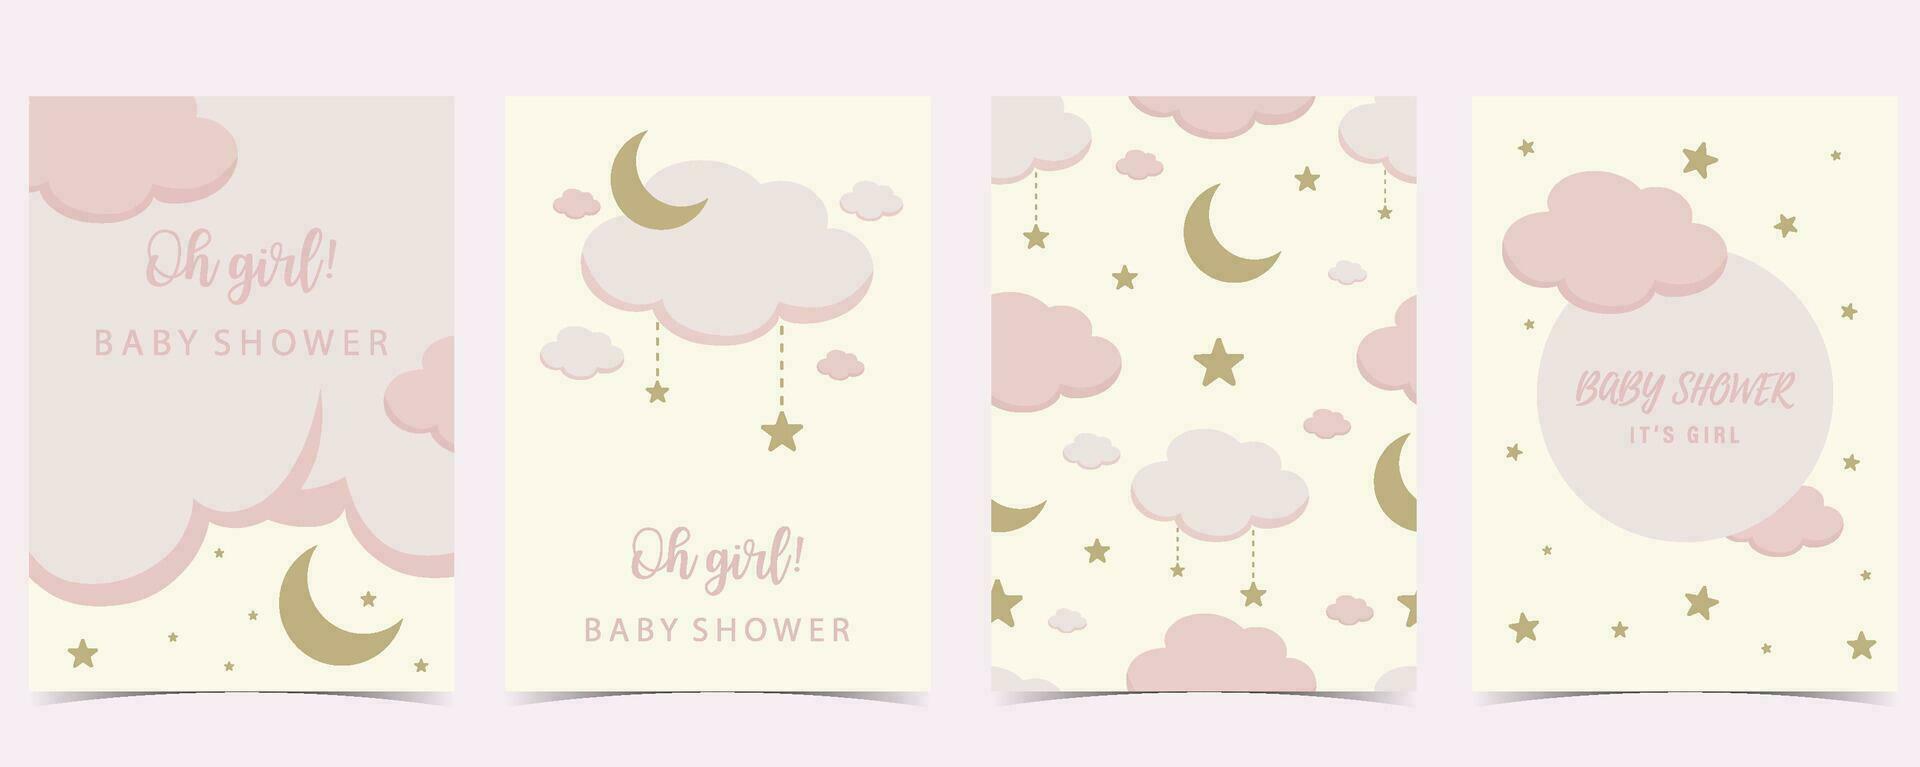 Baby shower invitation card for girl with balloon, cloud,sky, pink vector